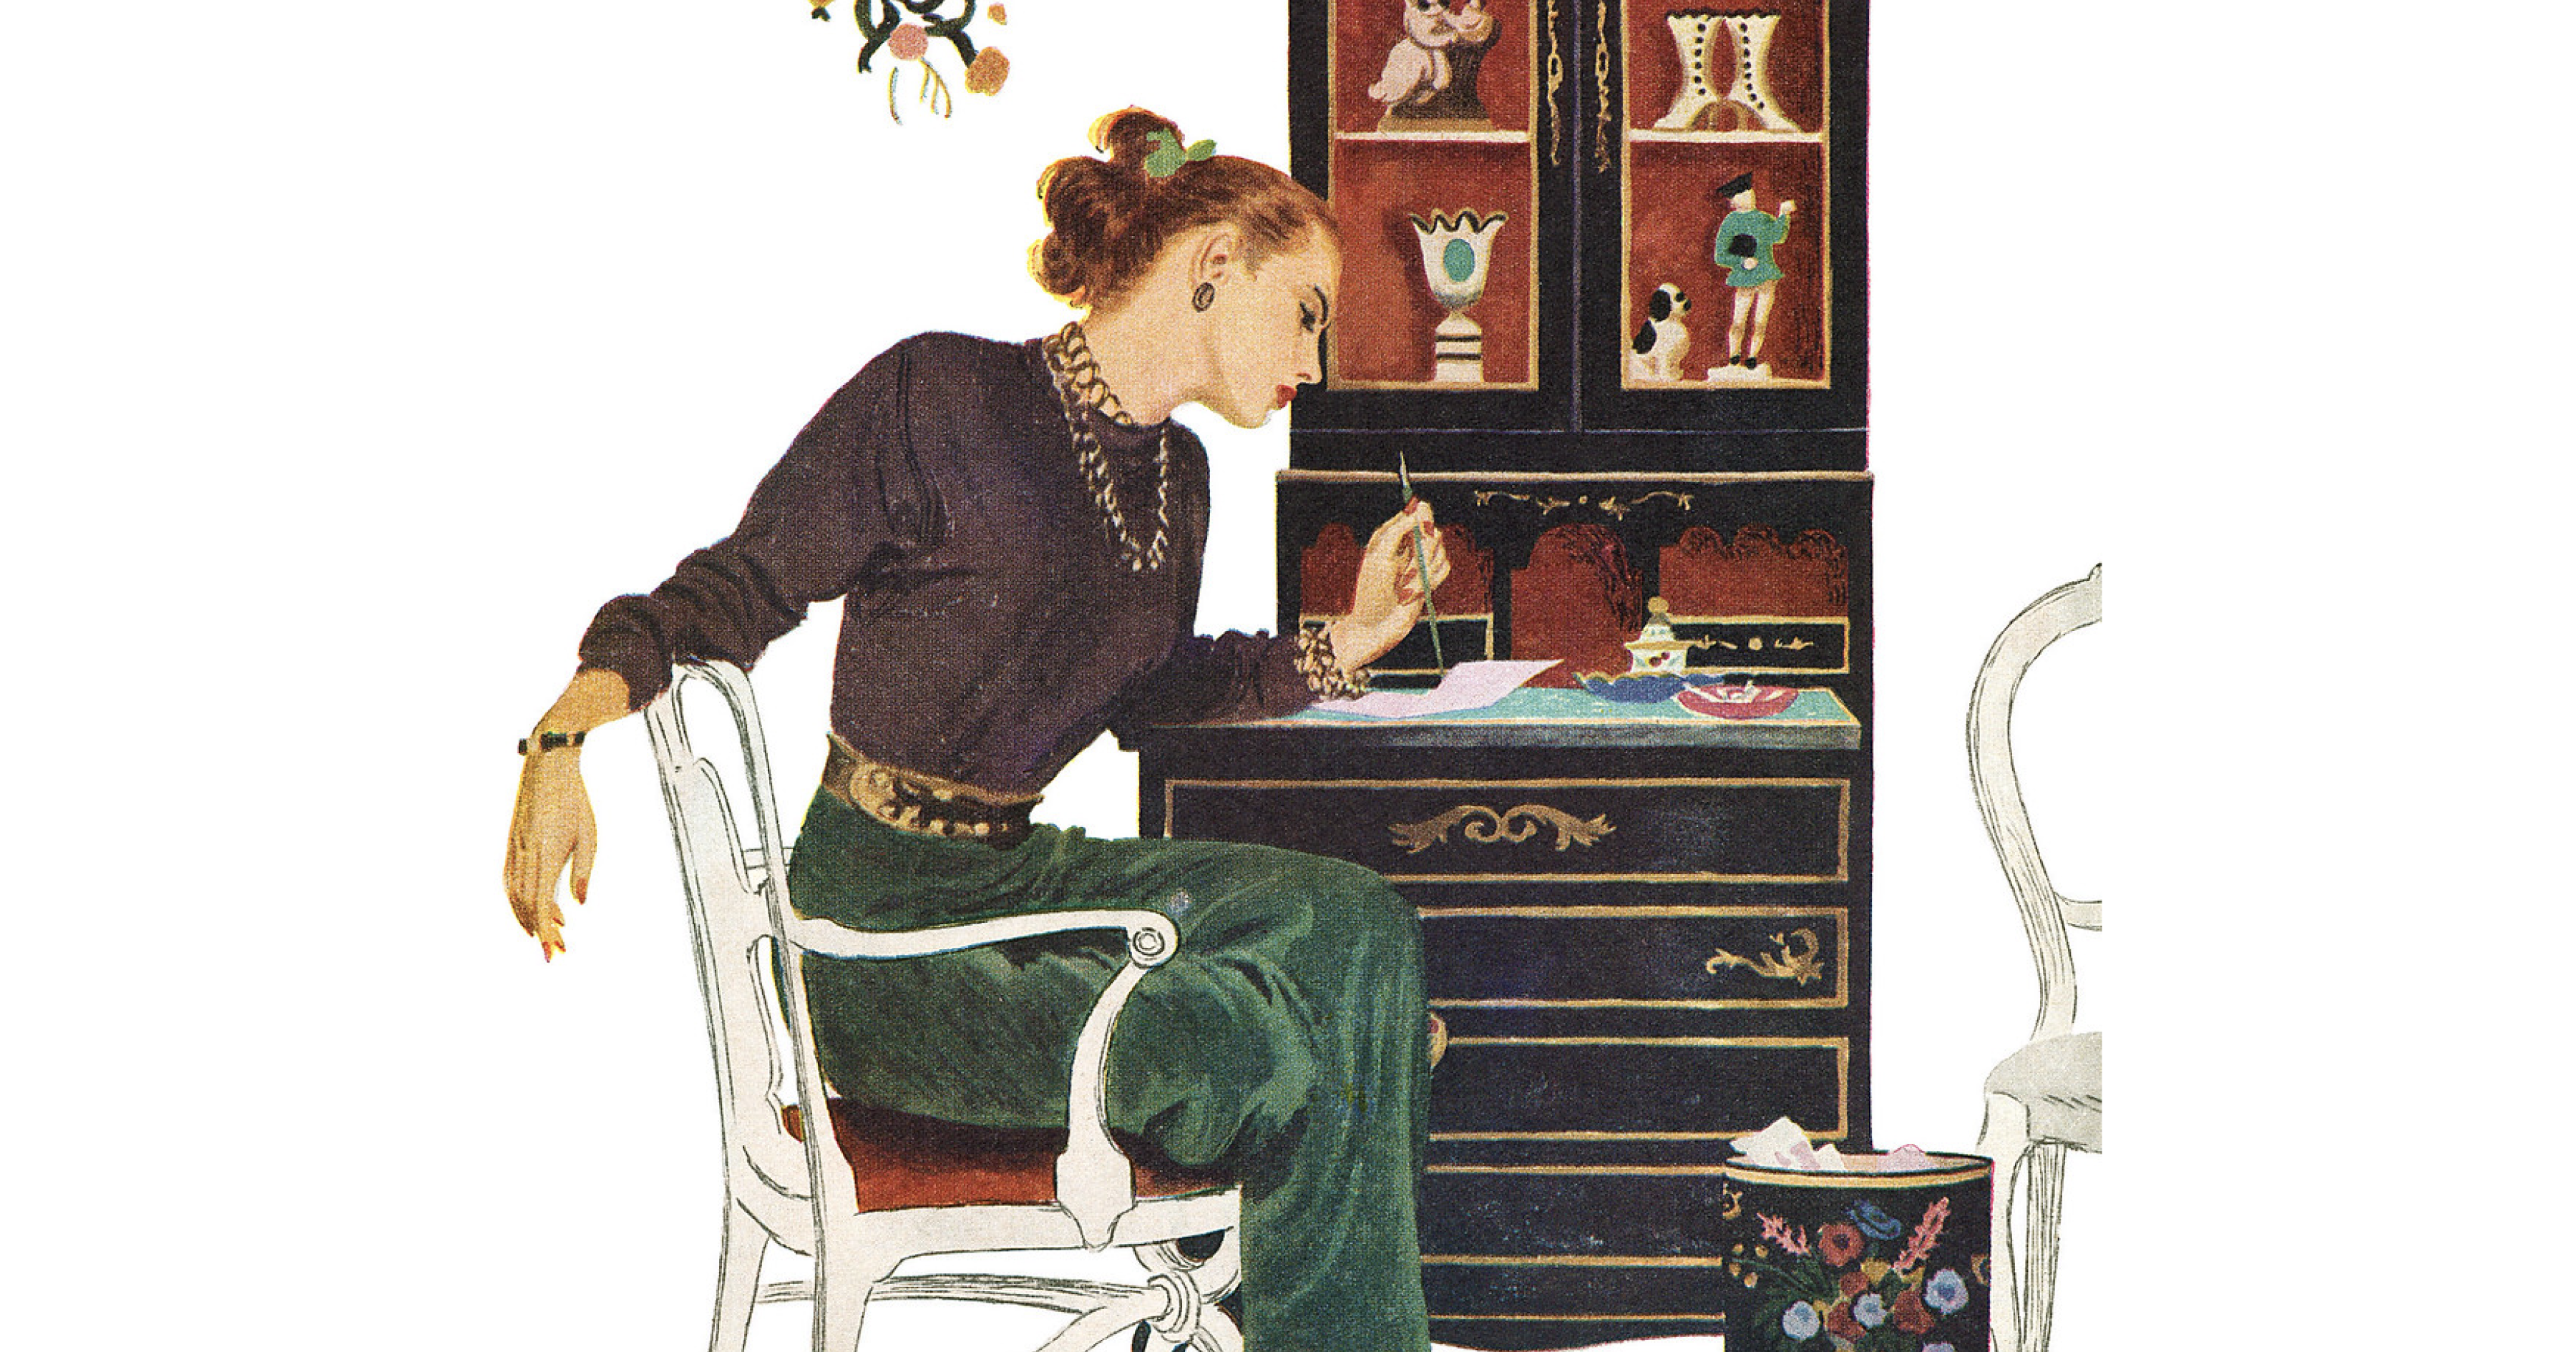 An elegant woman sits at her desk, either writing or making art